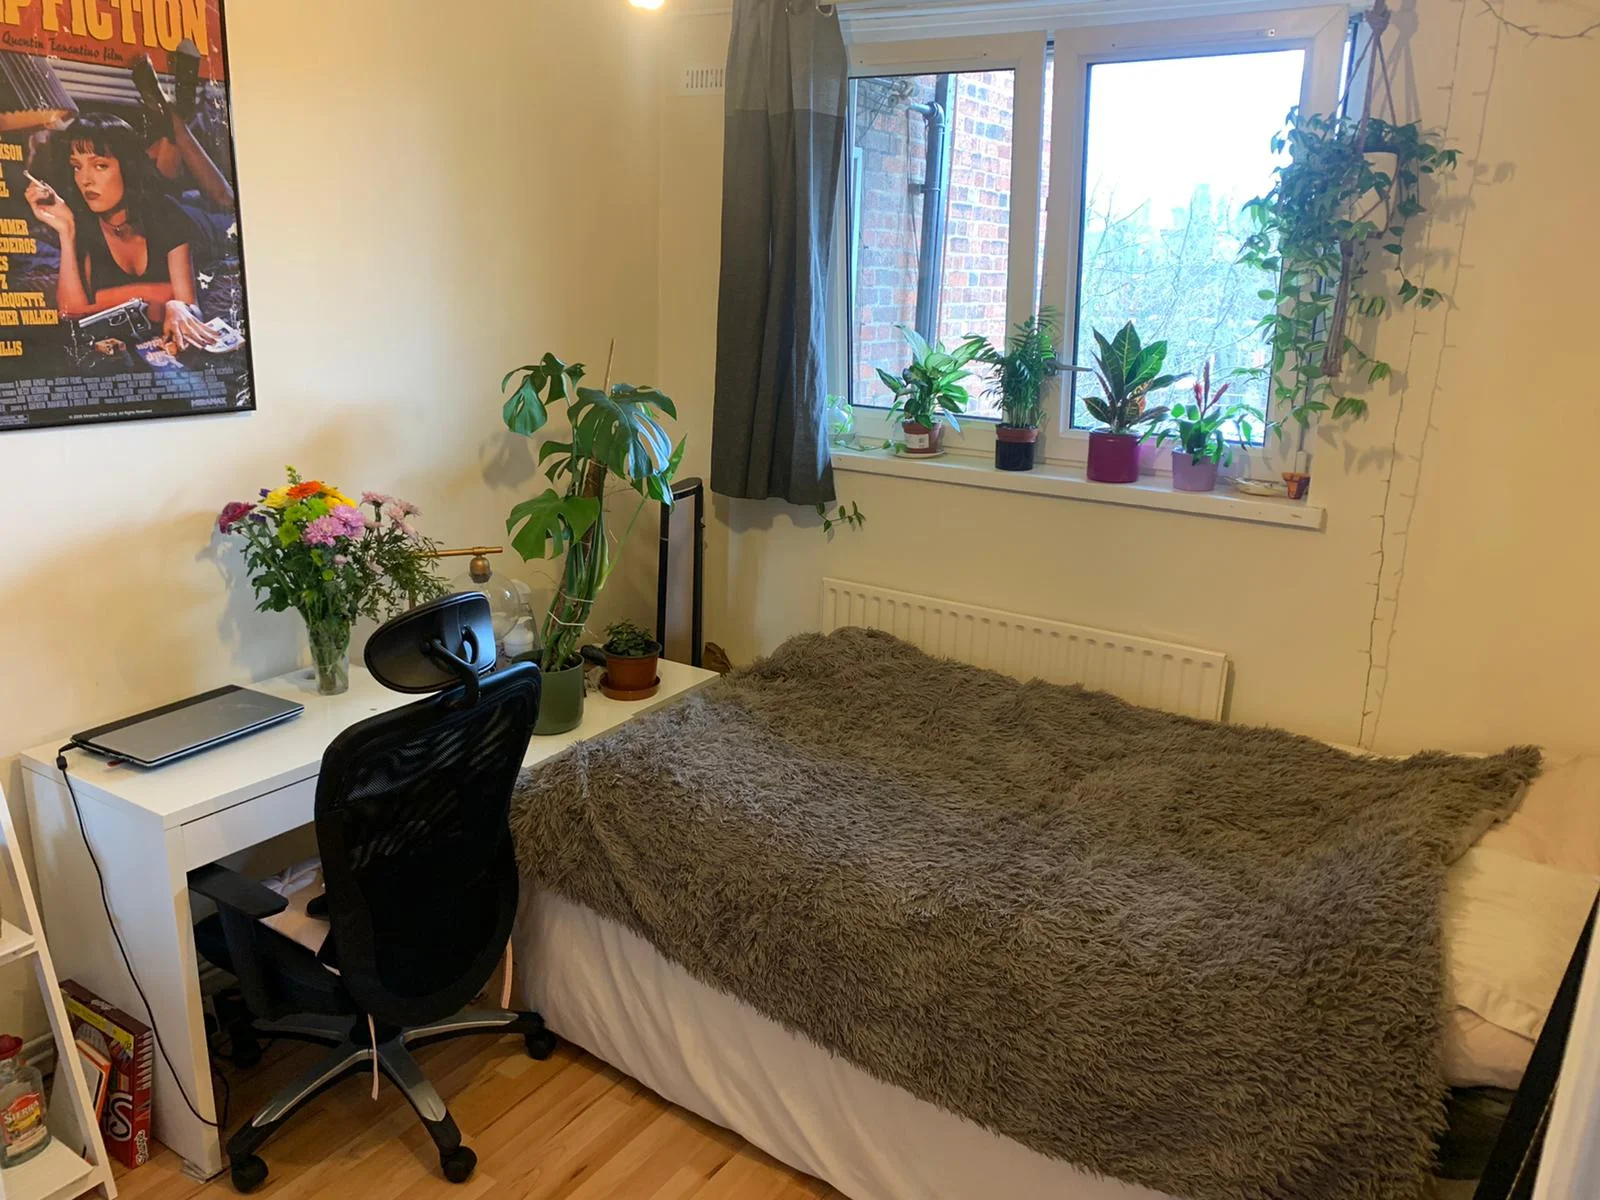 Four Bedroom Flat Located In Bethnal Green/Victoria Park